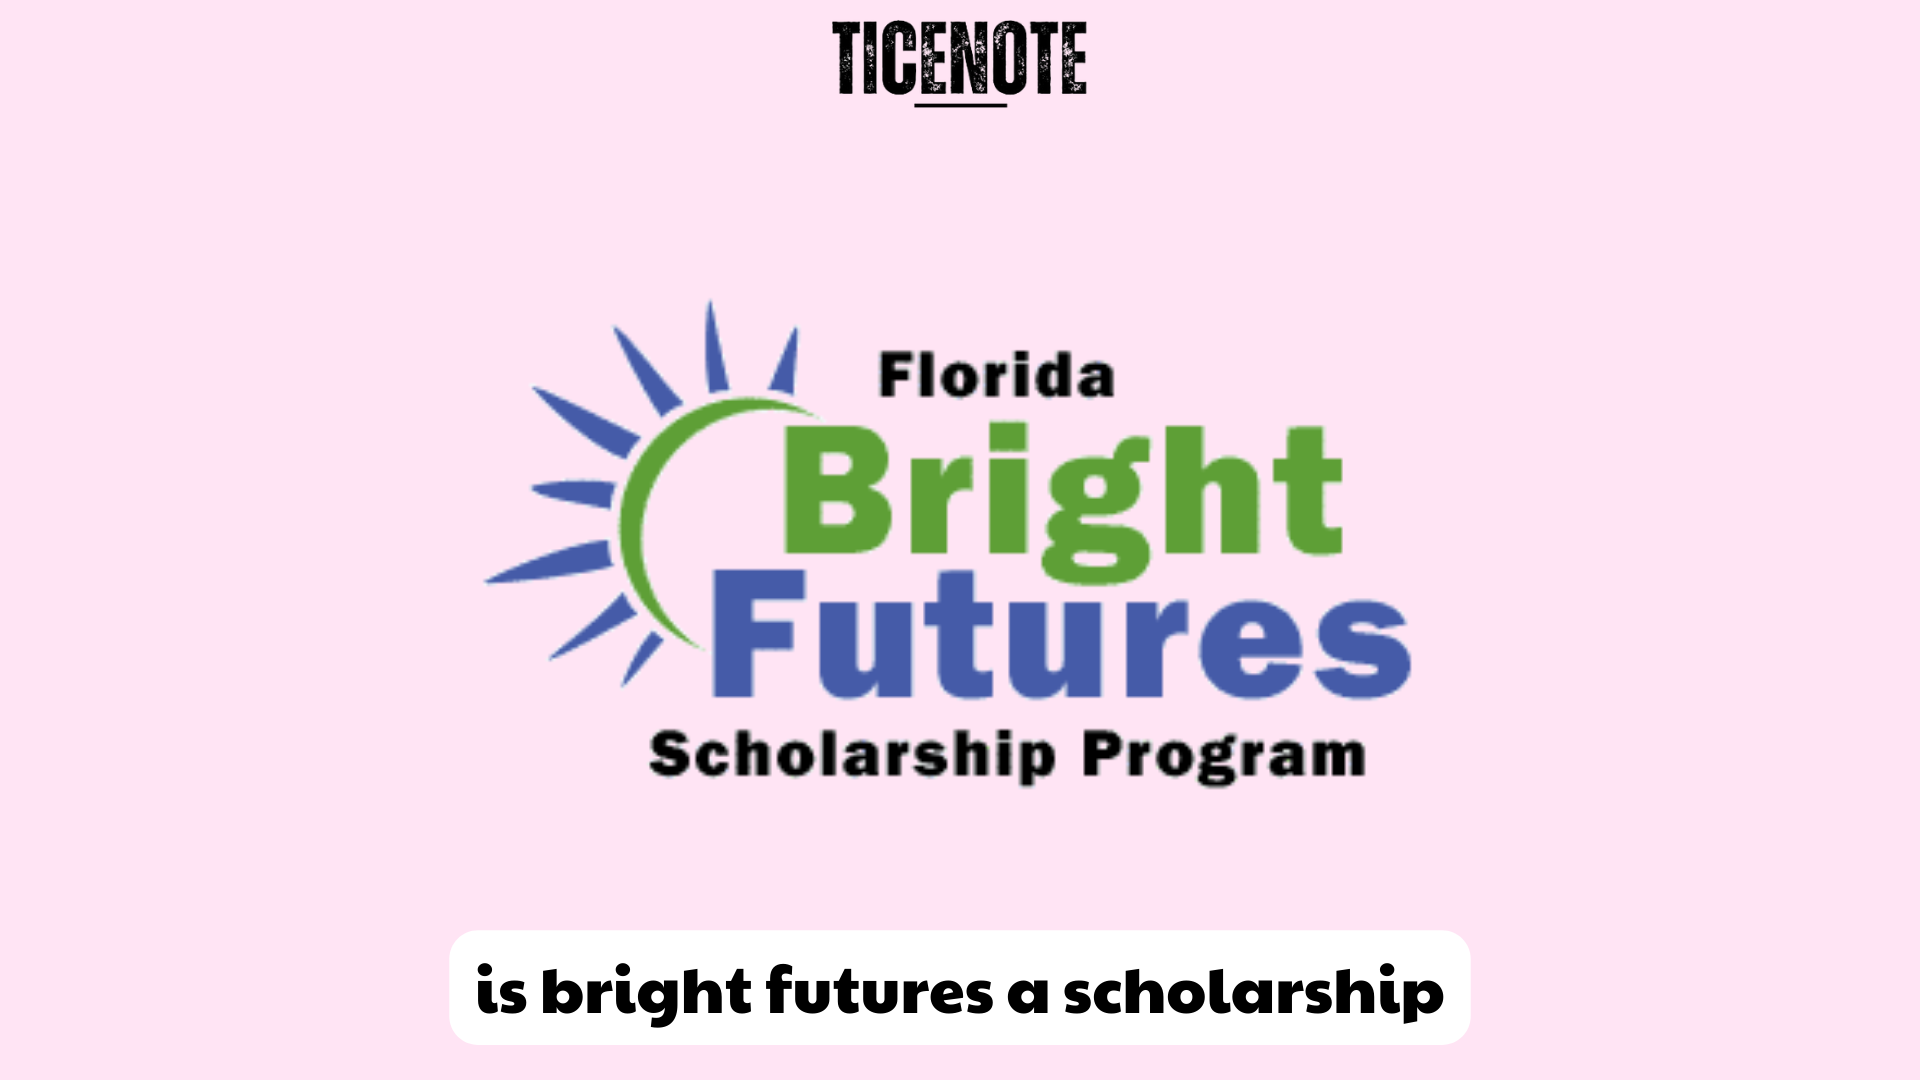 is bright futures a scholarship